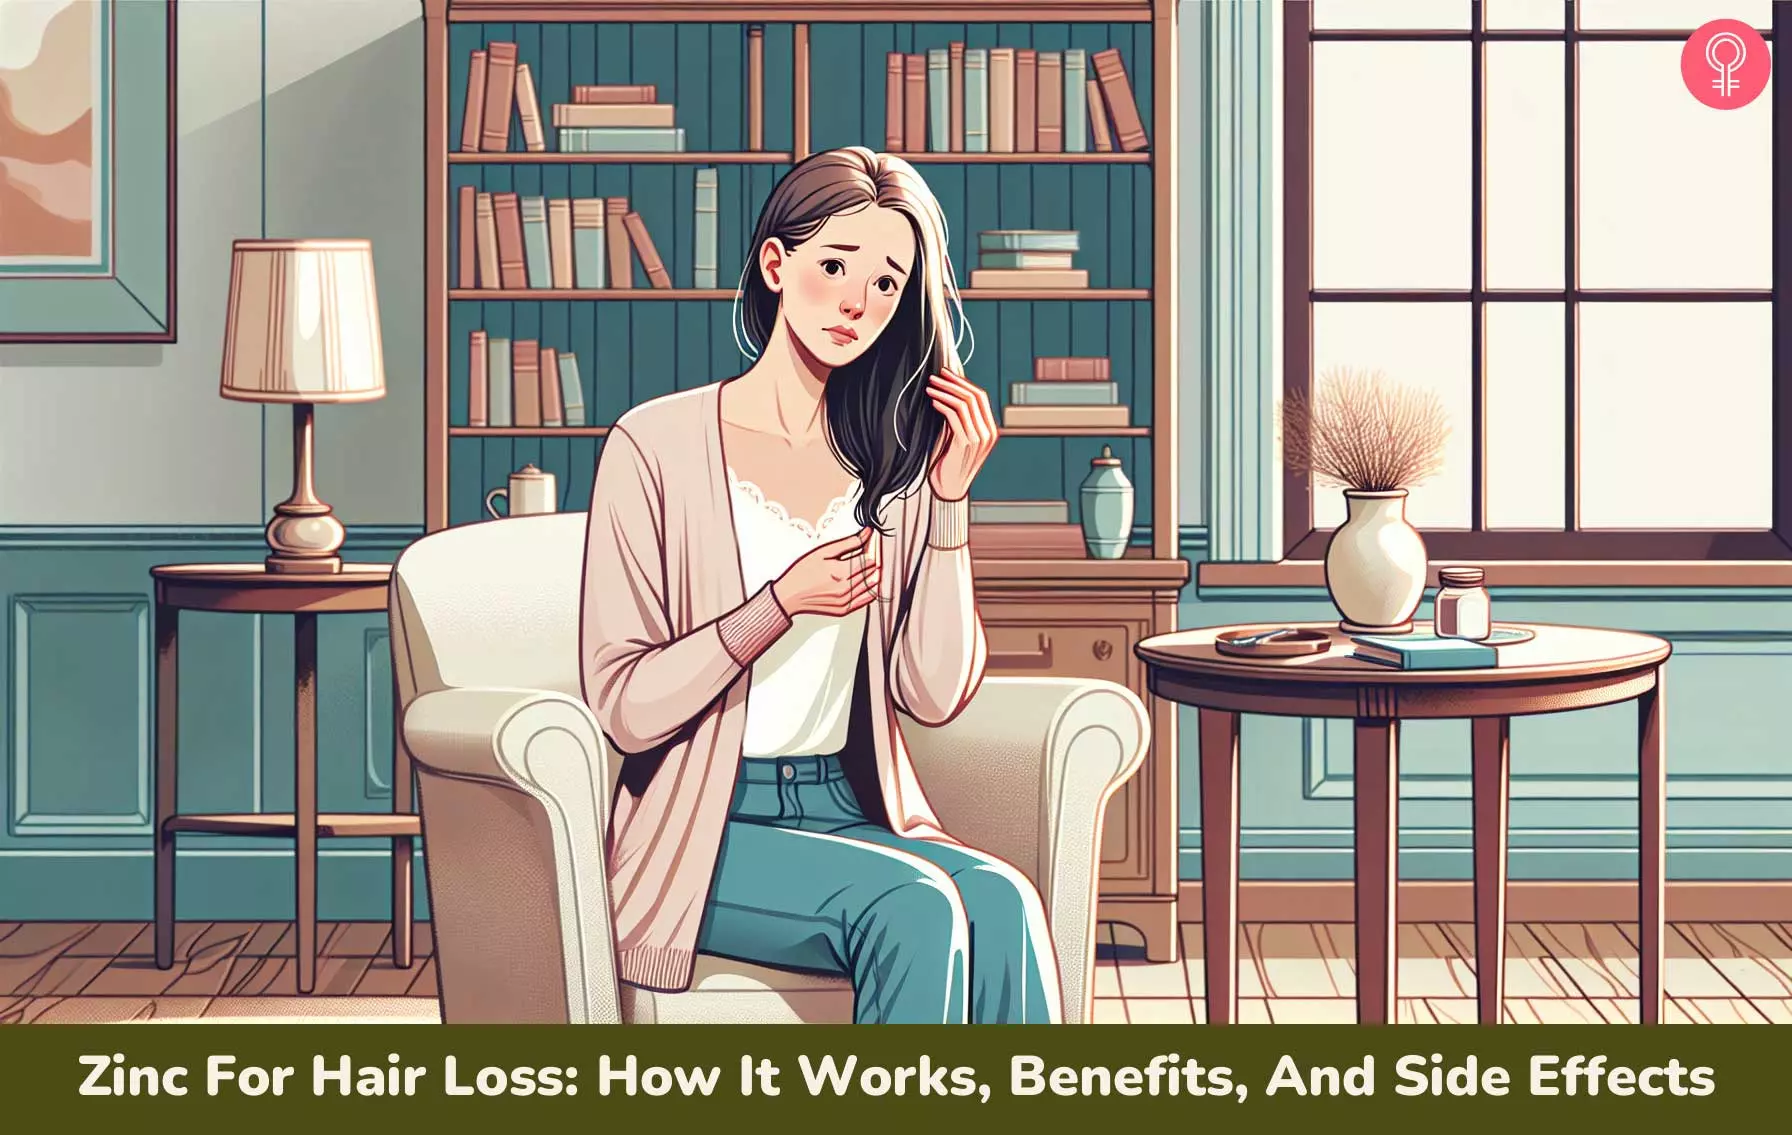 Zinc For Hair Loss: How It Works, Benefits, And Side Effects